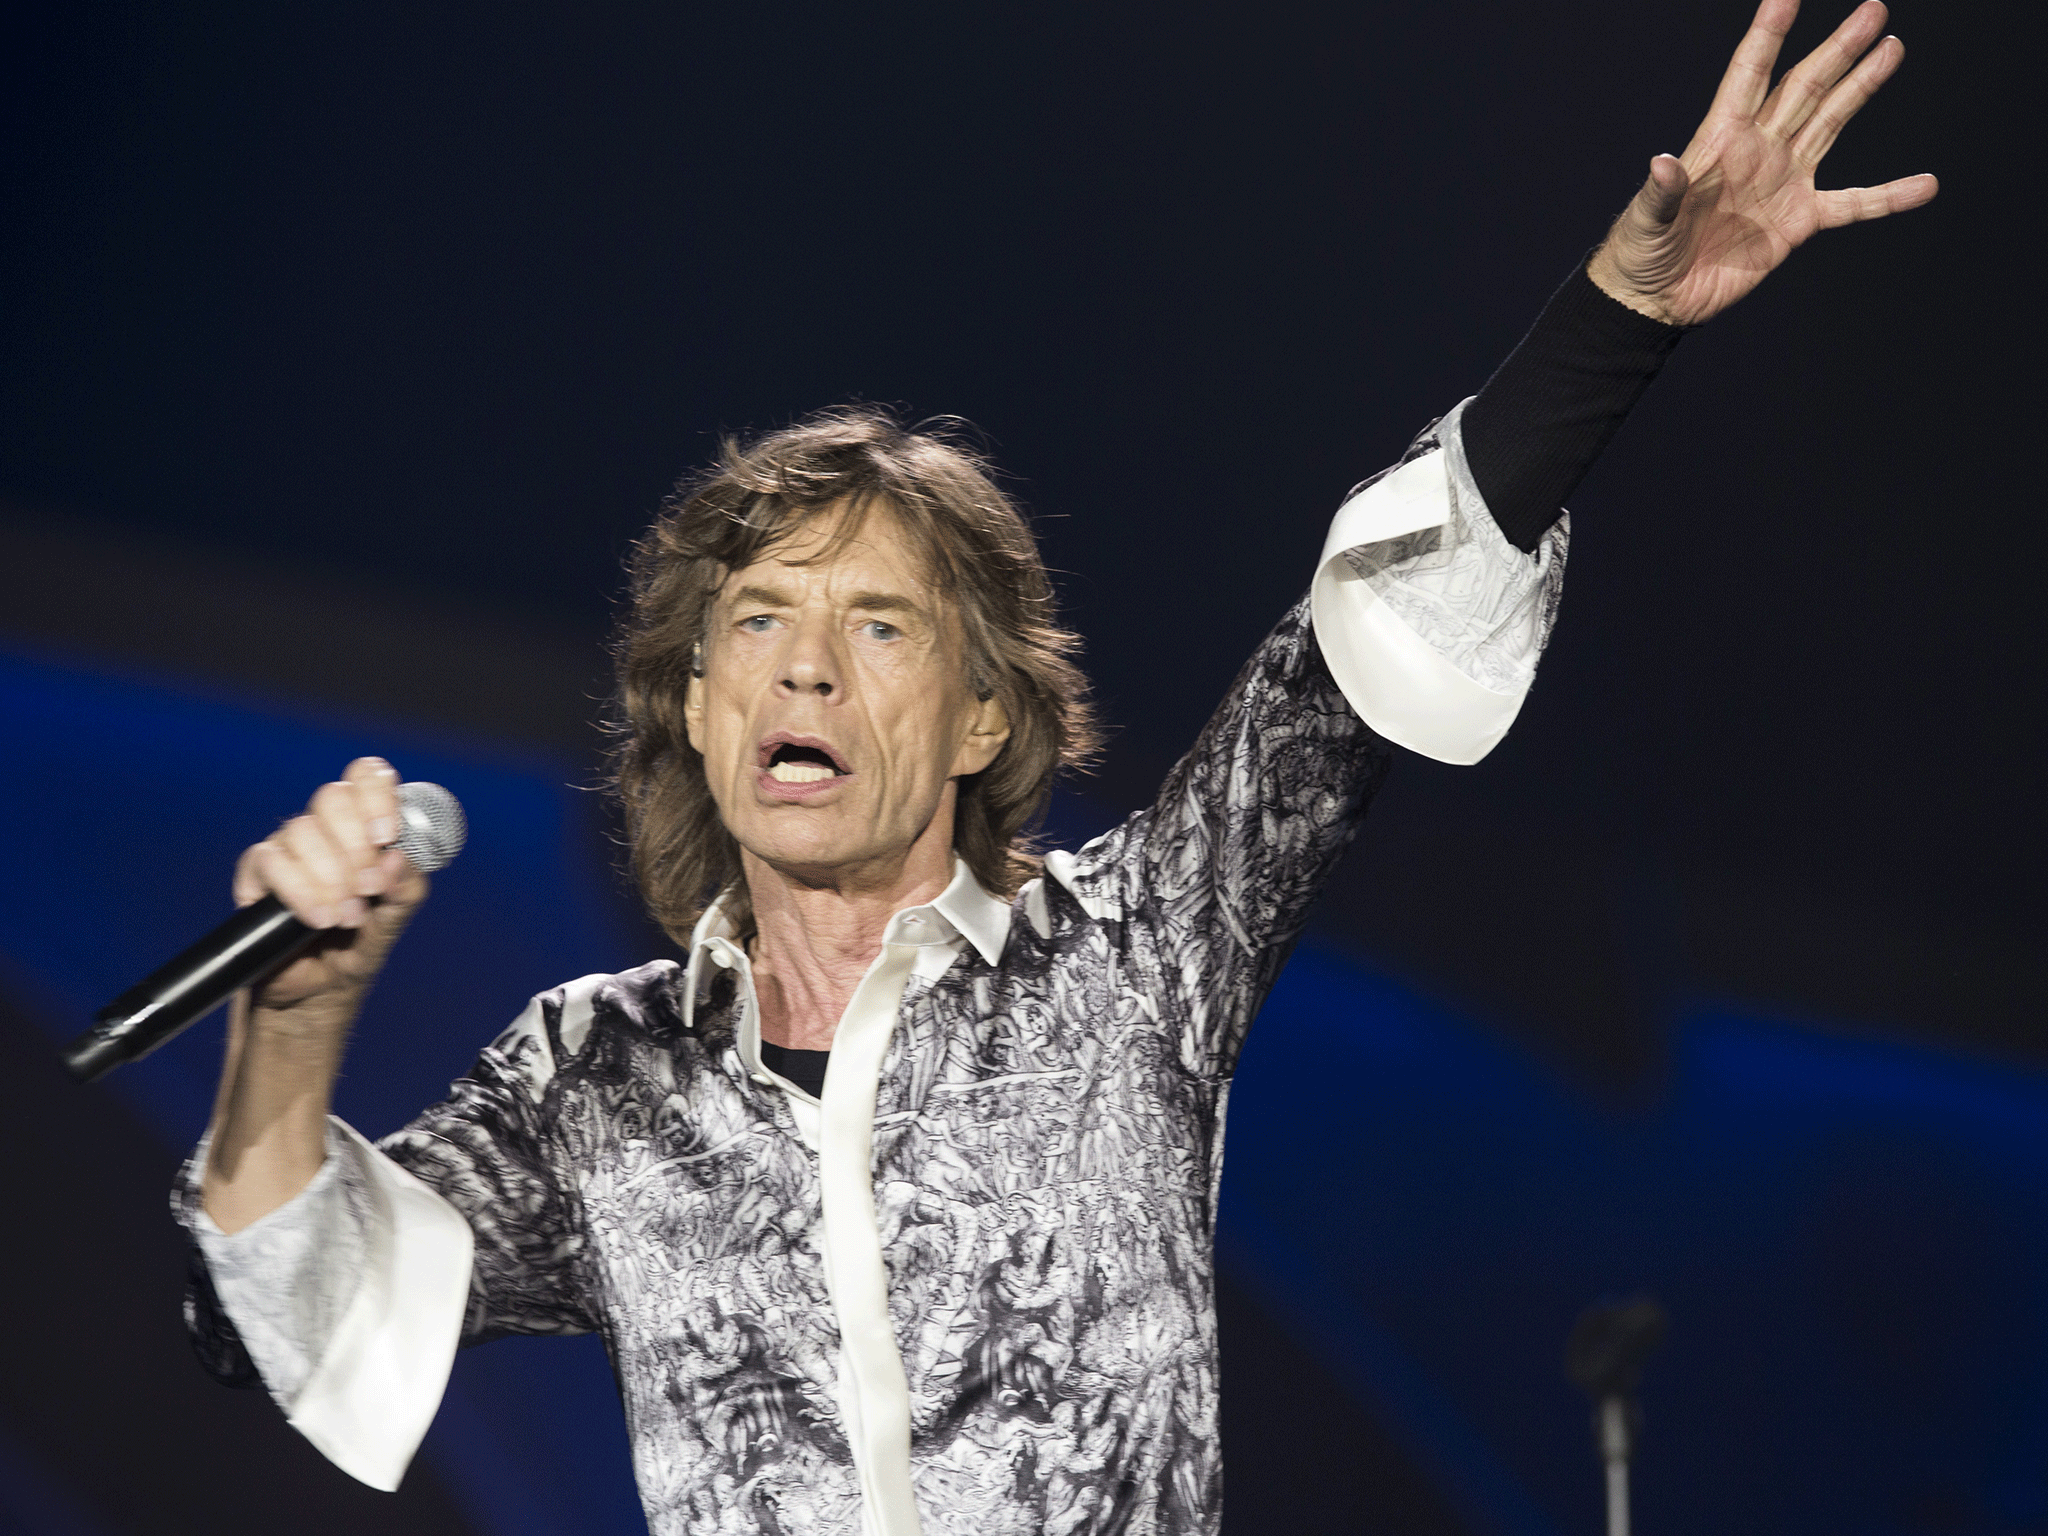 Mick Jagger joined The Rolling Stones to resume their tour in Oslo after L'Wren Scott's suicide